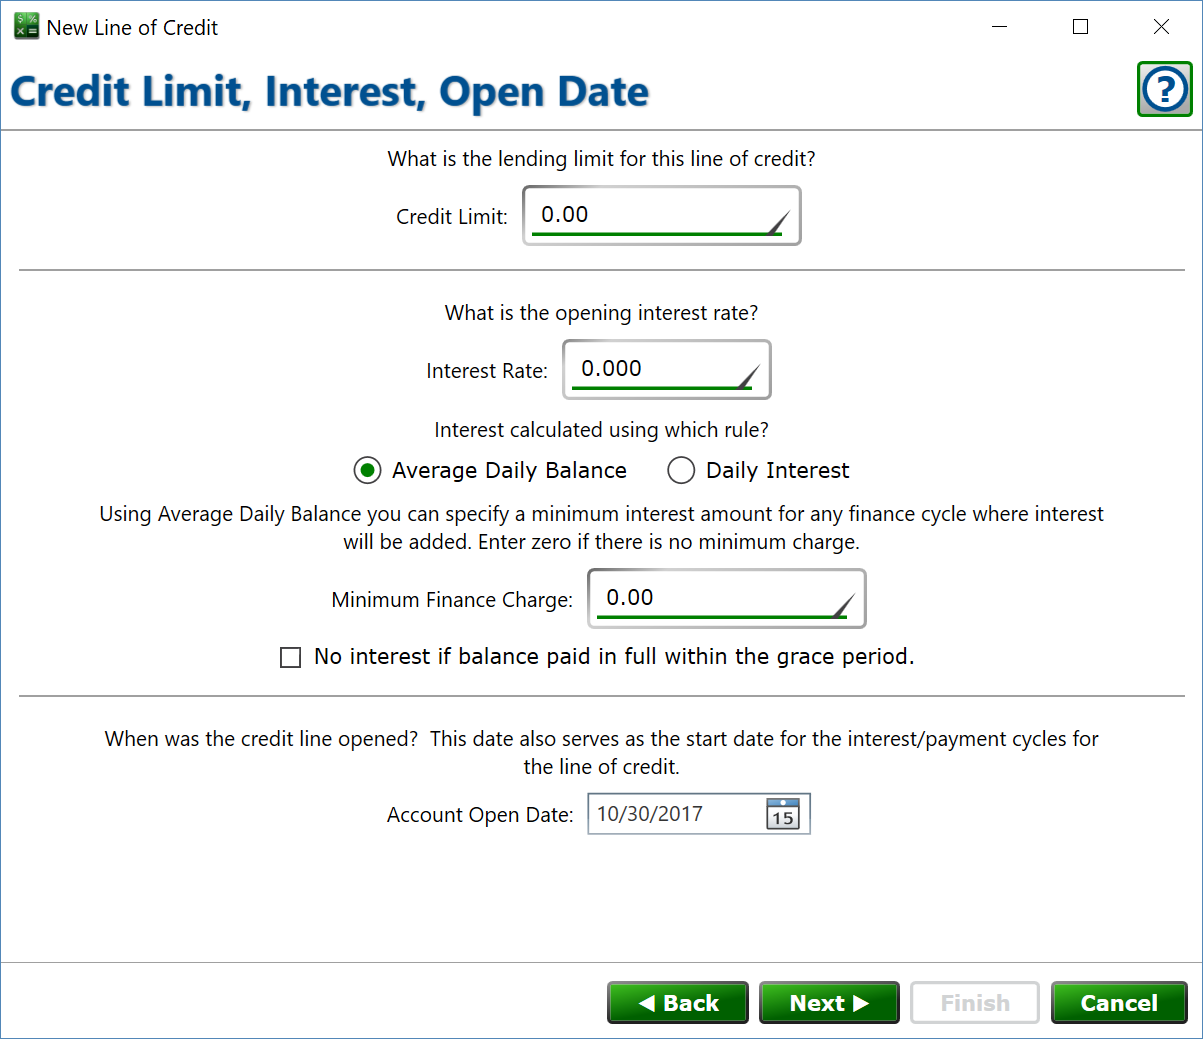 Screenshot of the form to set the credit limit, interest rate, and opening date for a revolving line of credit.